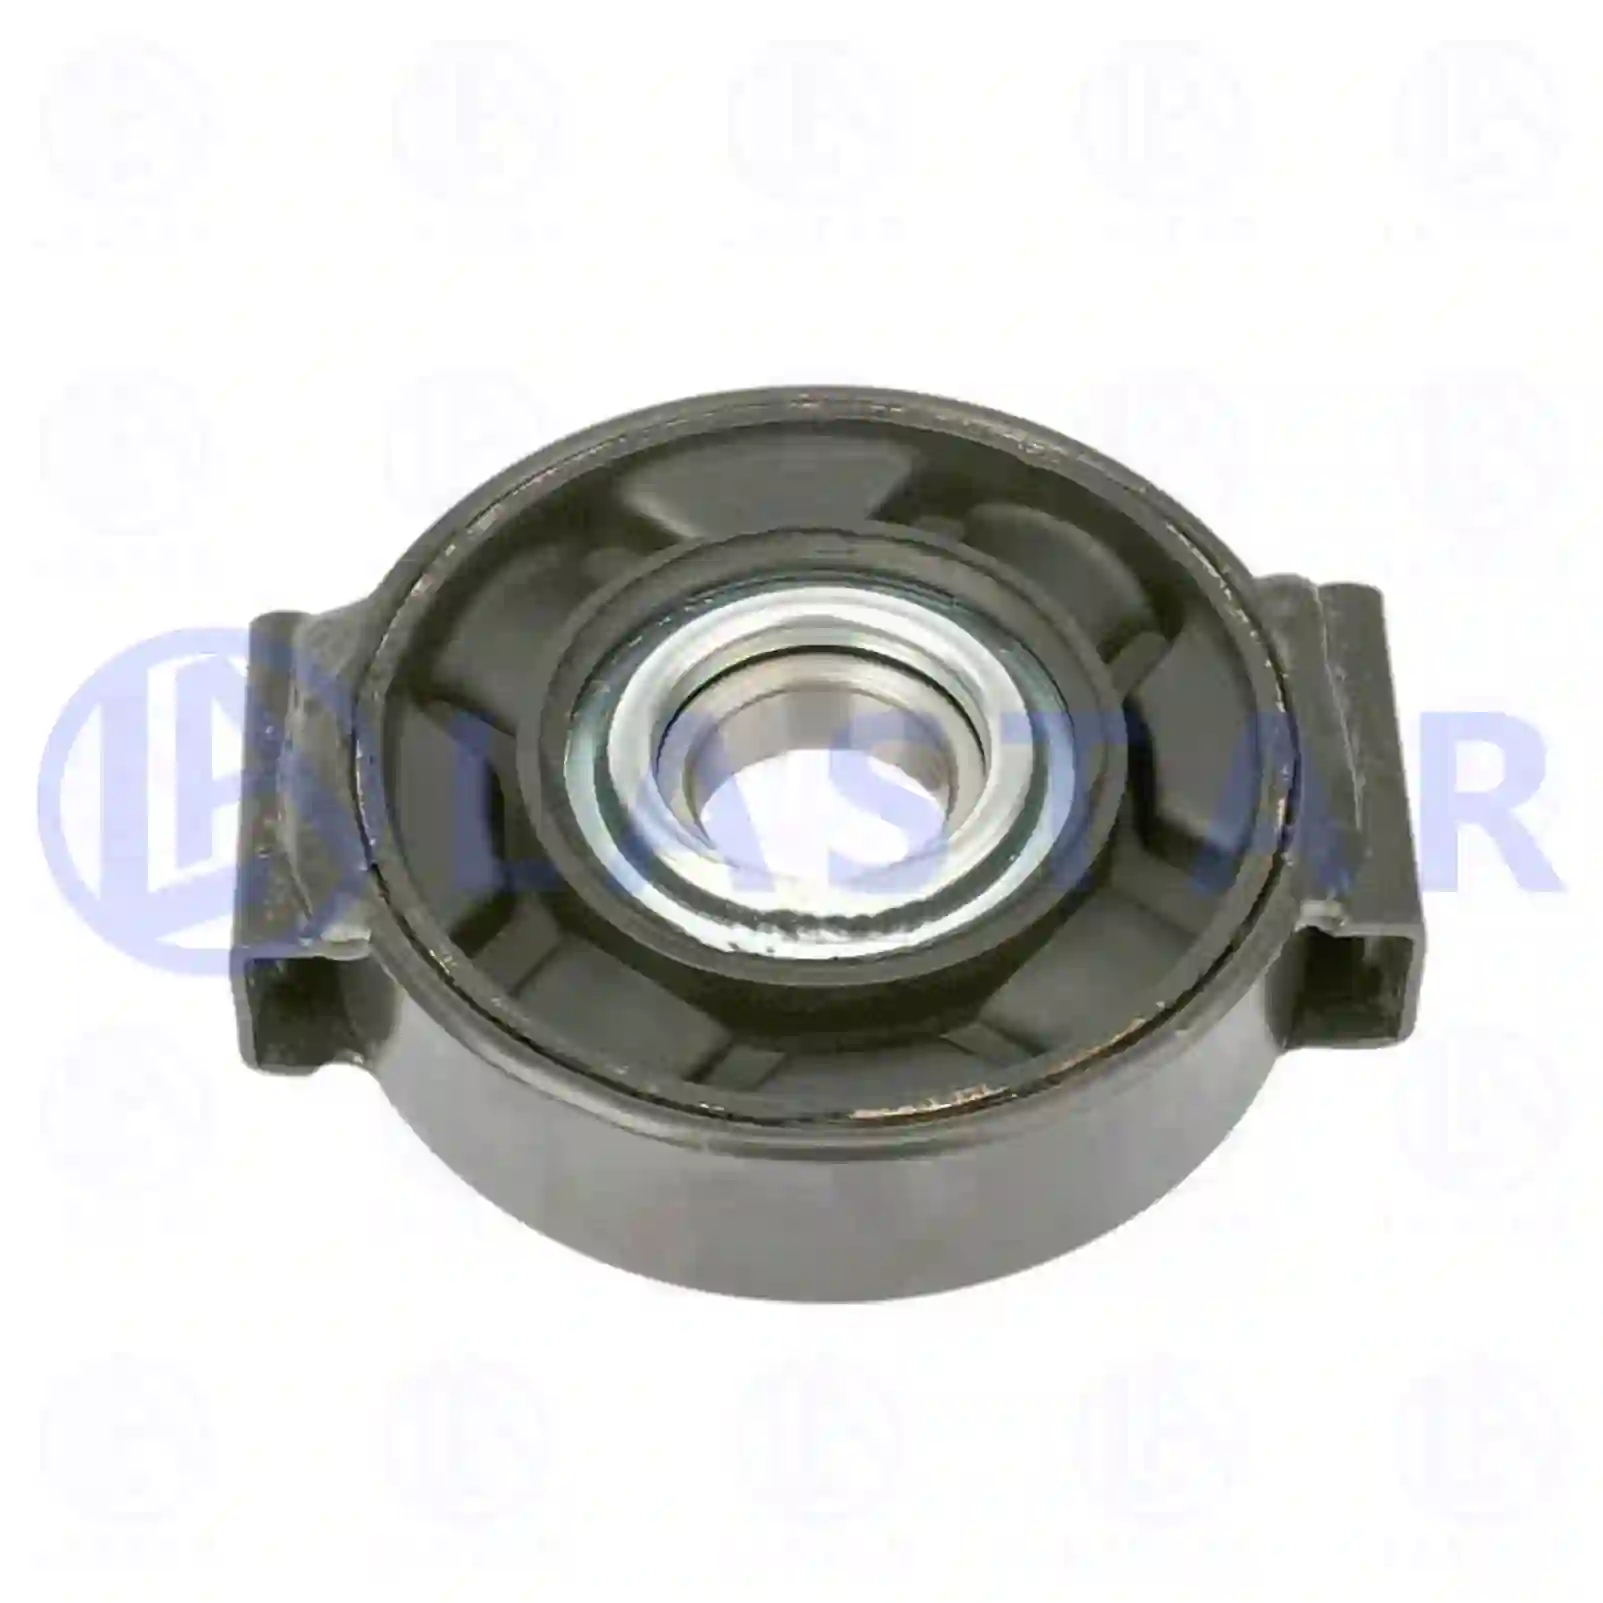 Support Bearing Center bearing, la no: 77734146 ,  oem no:4604100022, 4604100222, ZG02483-0008 Lastar Spare Part | Truck Spare Parts, Auotomotive Spare Parts